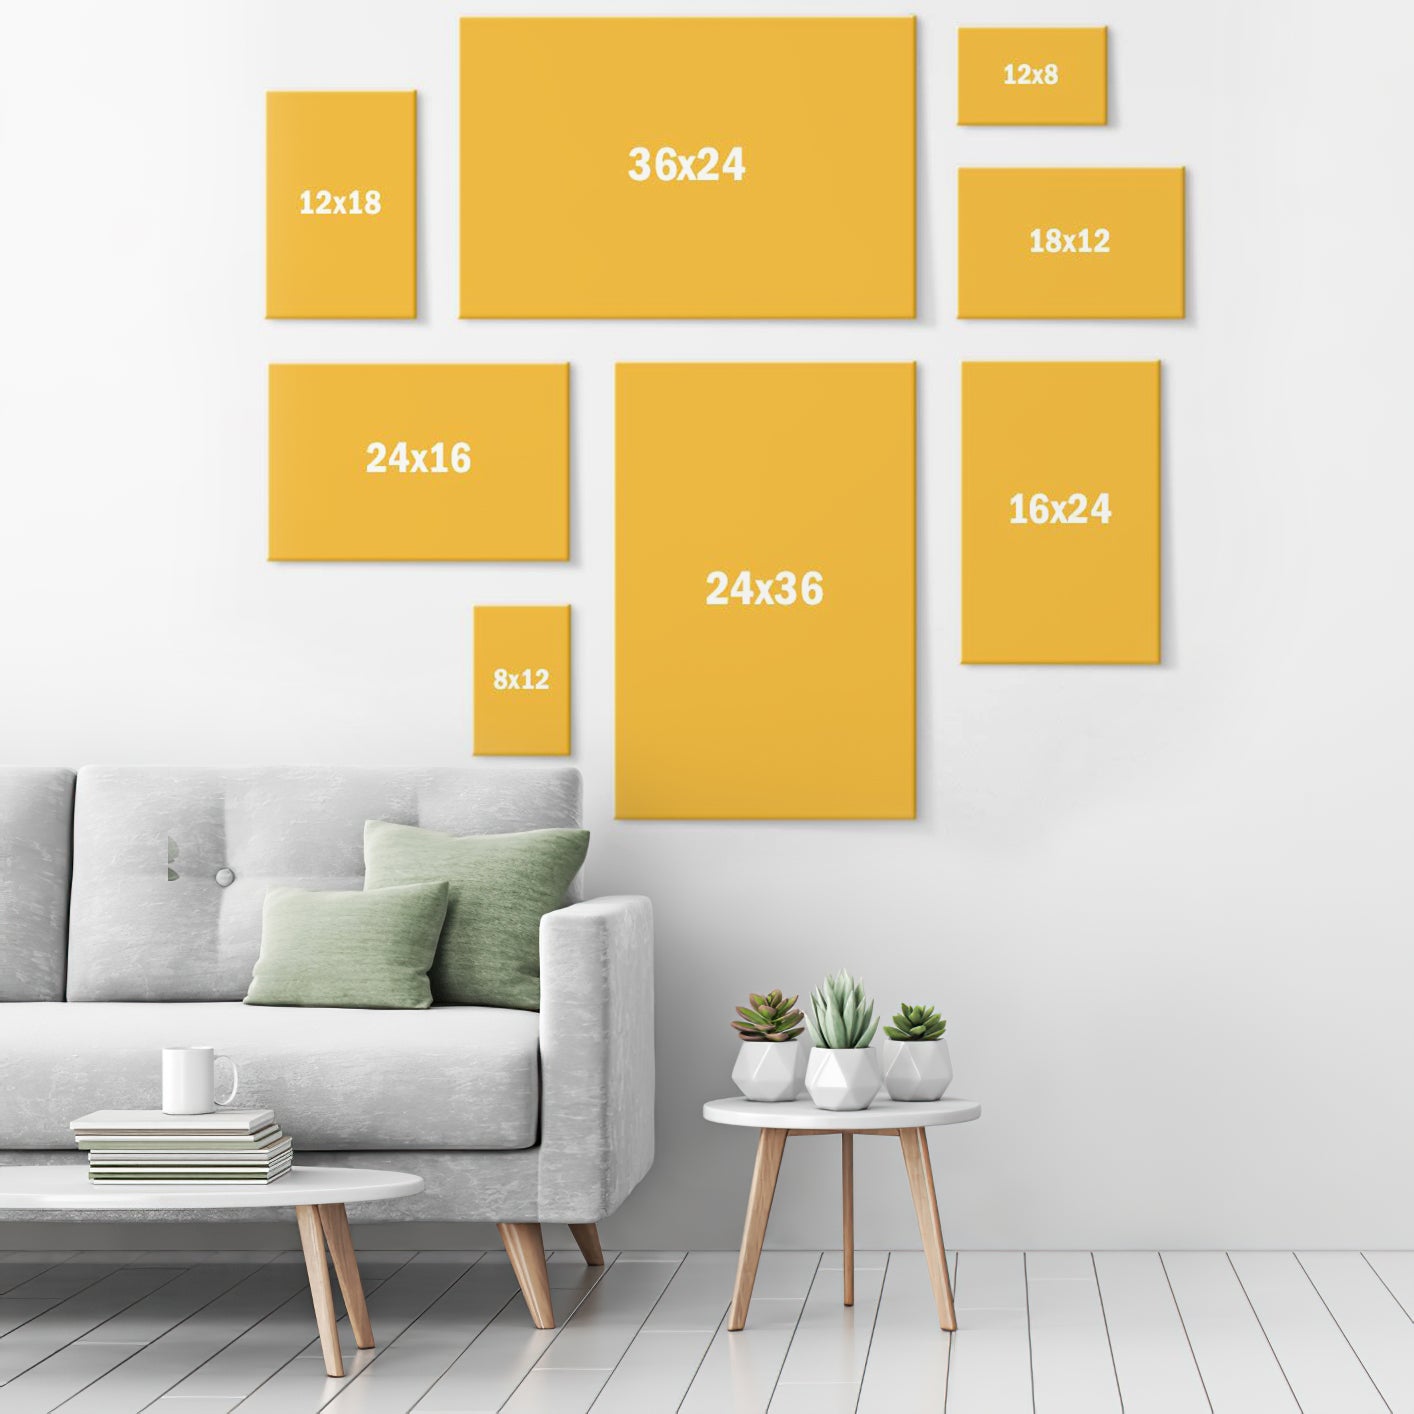 Bible Verse Canvas - Be Still And Know That I Am God Psalm 4610 Dandelion Butterfly Wall Art Canvas - Scripture Canvas Wall Art - Ciaocustom